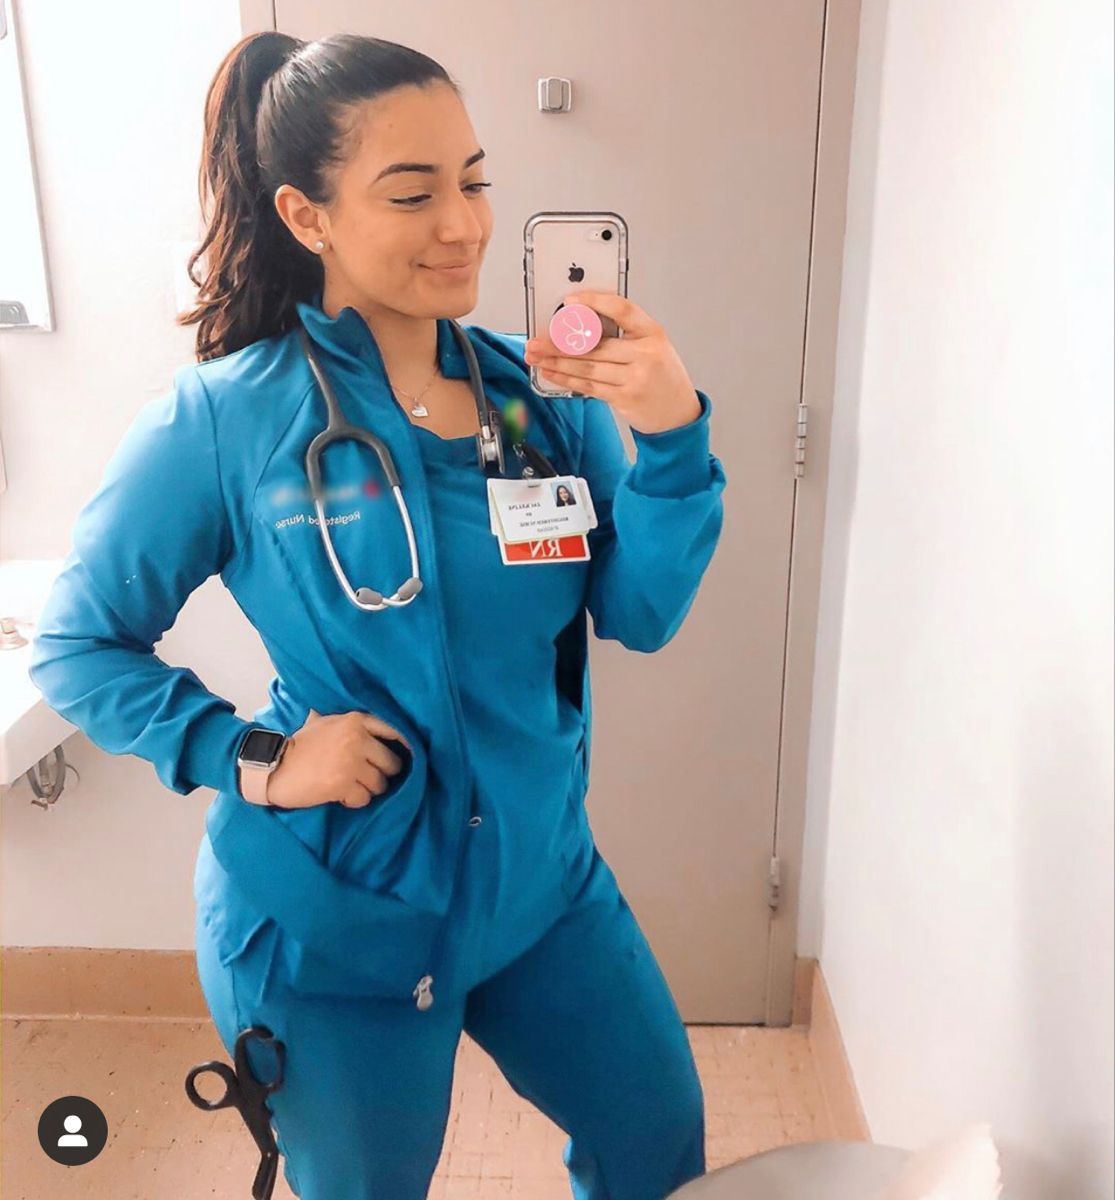 angelica parico recommends girls in scrubs tumblr pic